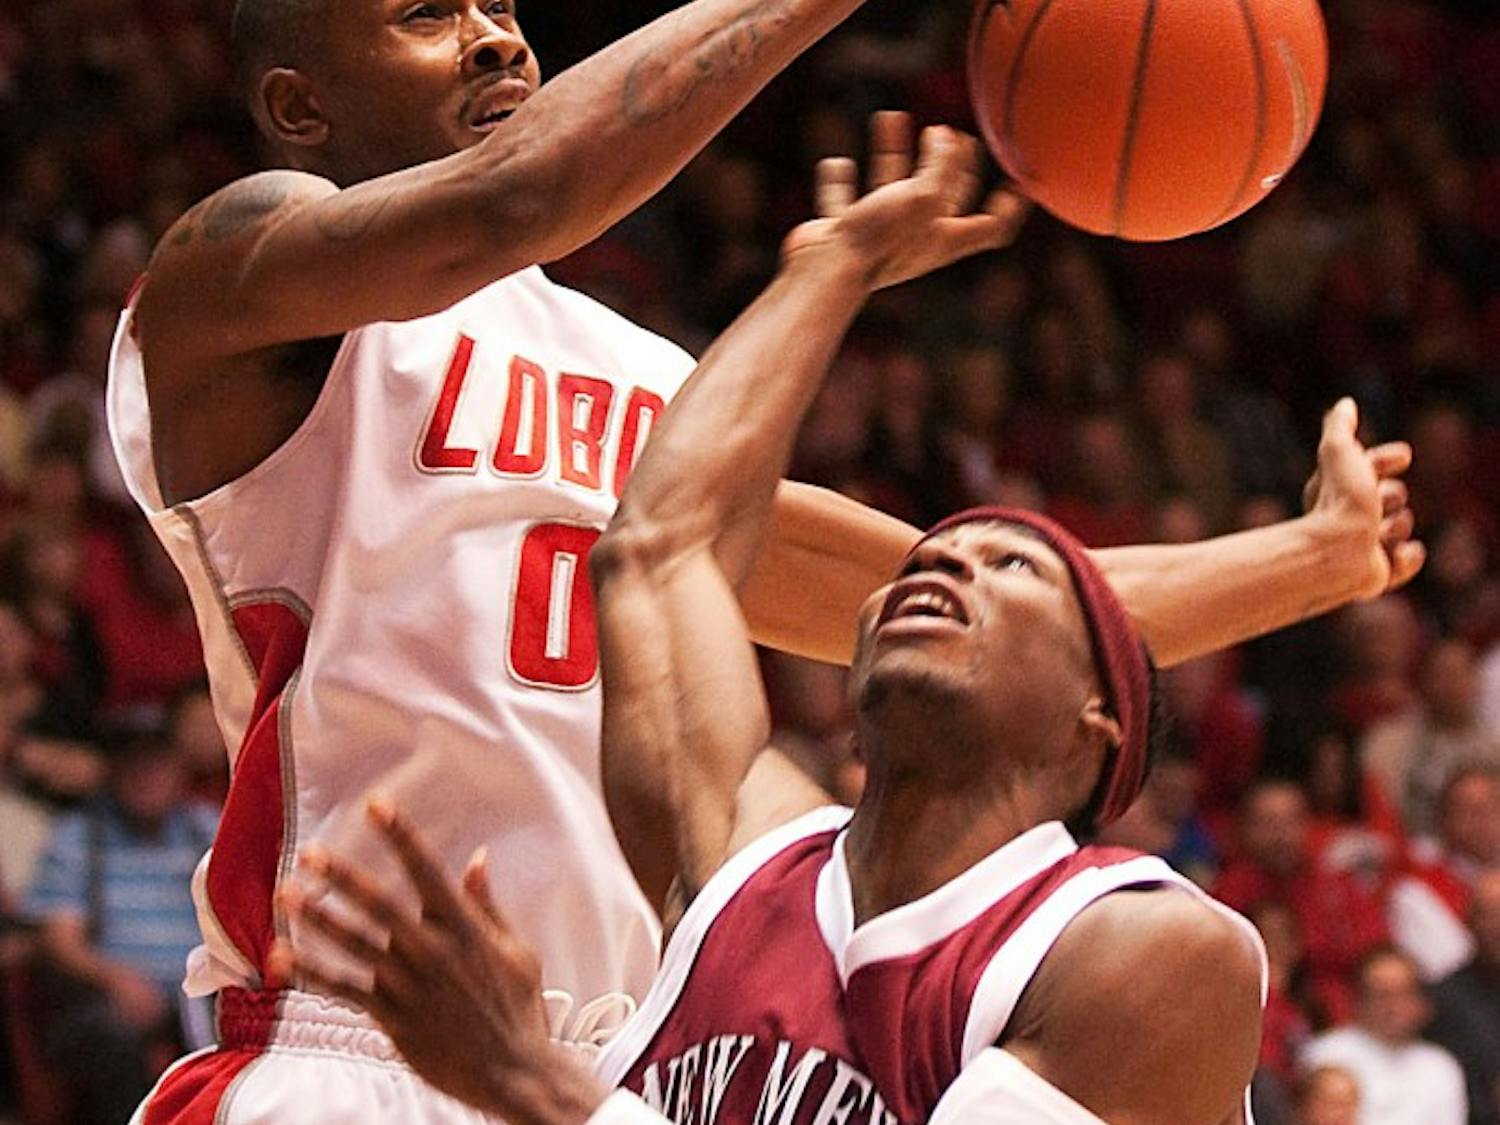 	Forward A.J. Hardeman blocks a shot by NMSU’s Jonathan Gibson in the Lobos’ 75-58 rout over the Aggies on Saturday at The Pit. UNM (8-0) is still undefeated.